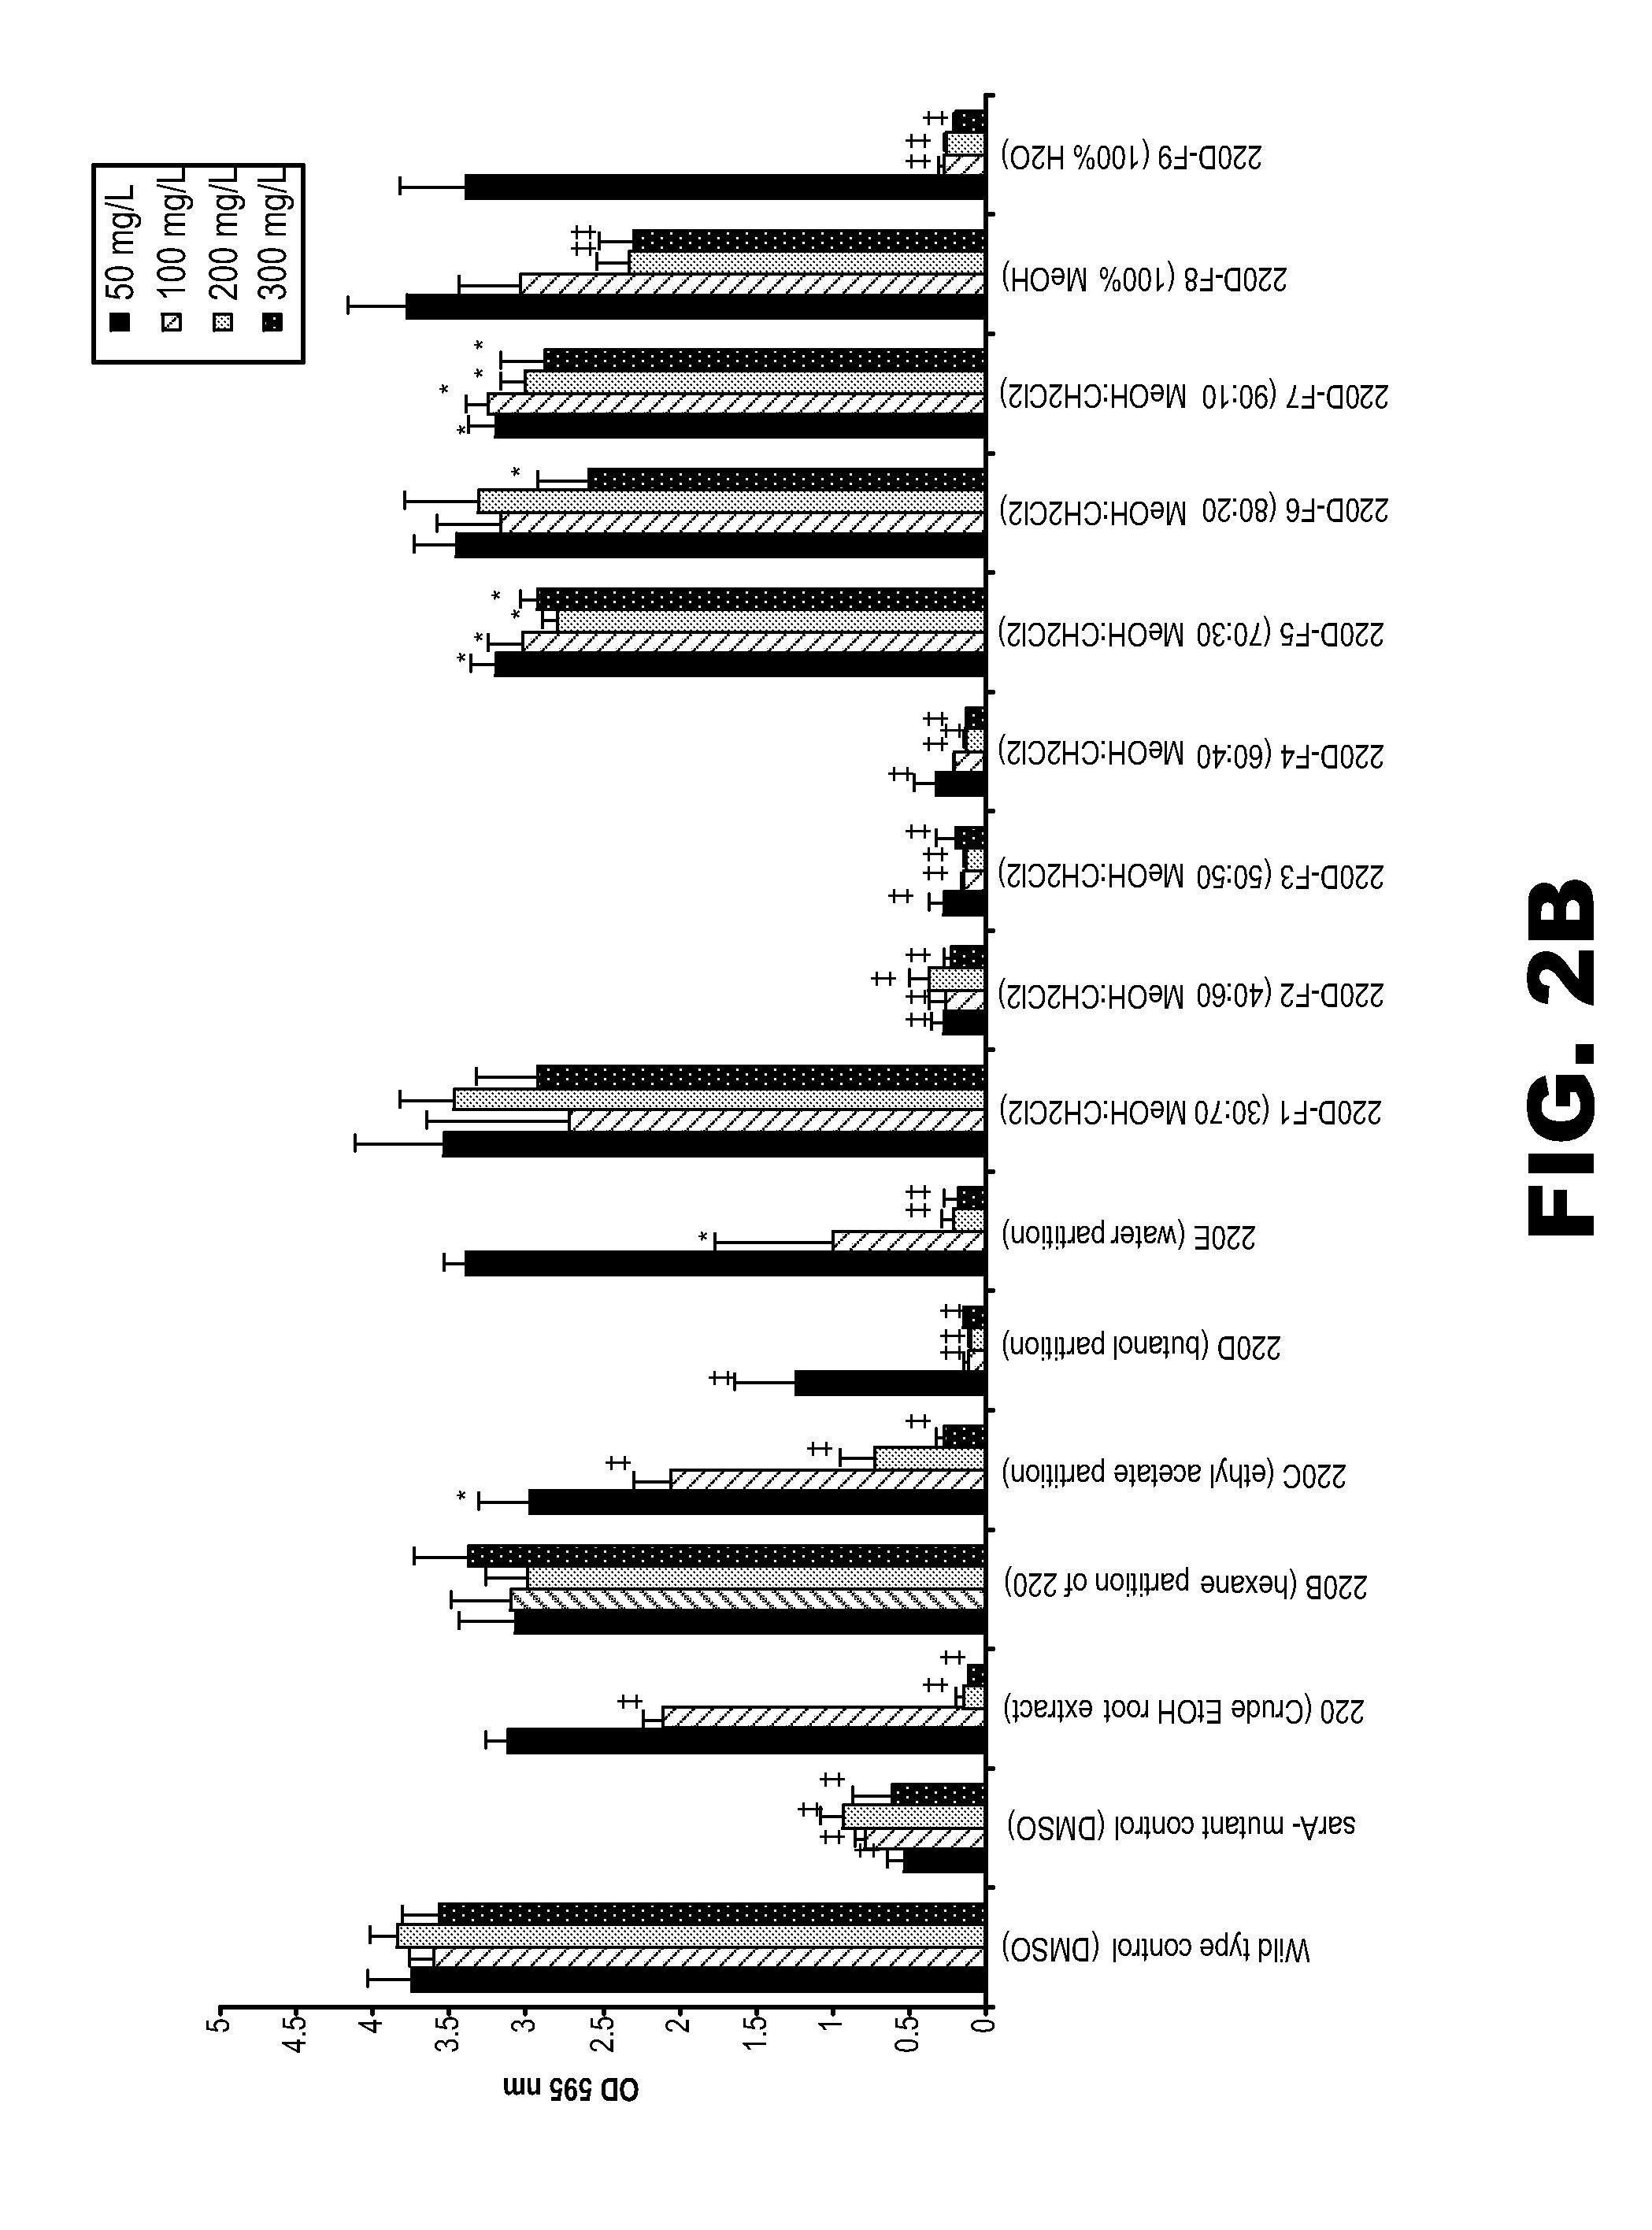 Anti-biofilm compositions and methods for using